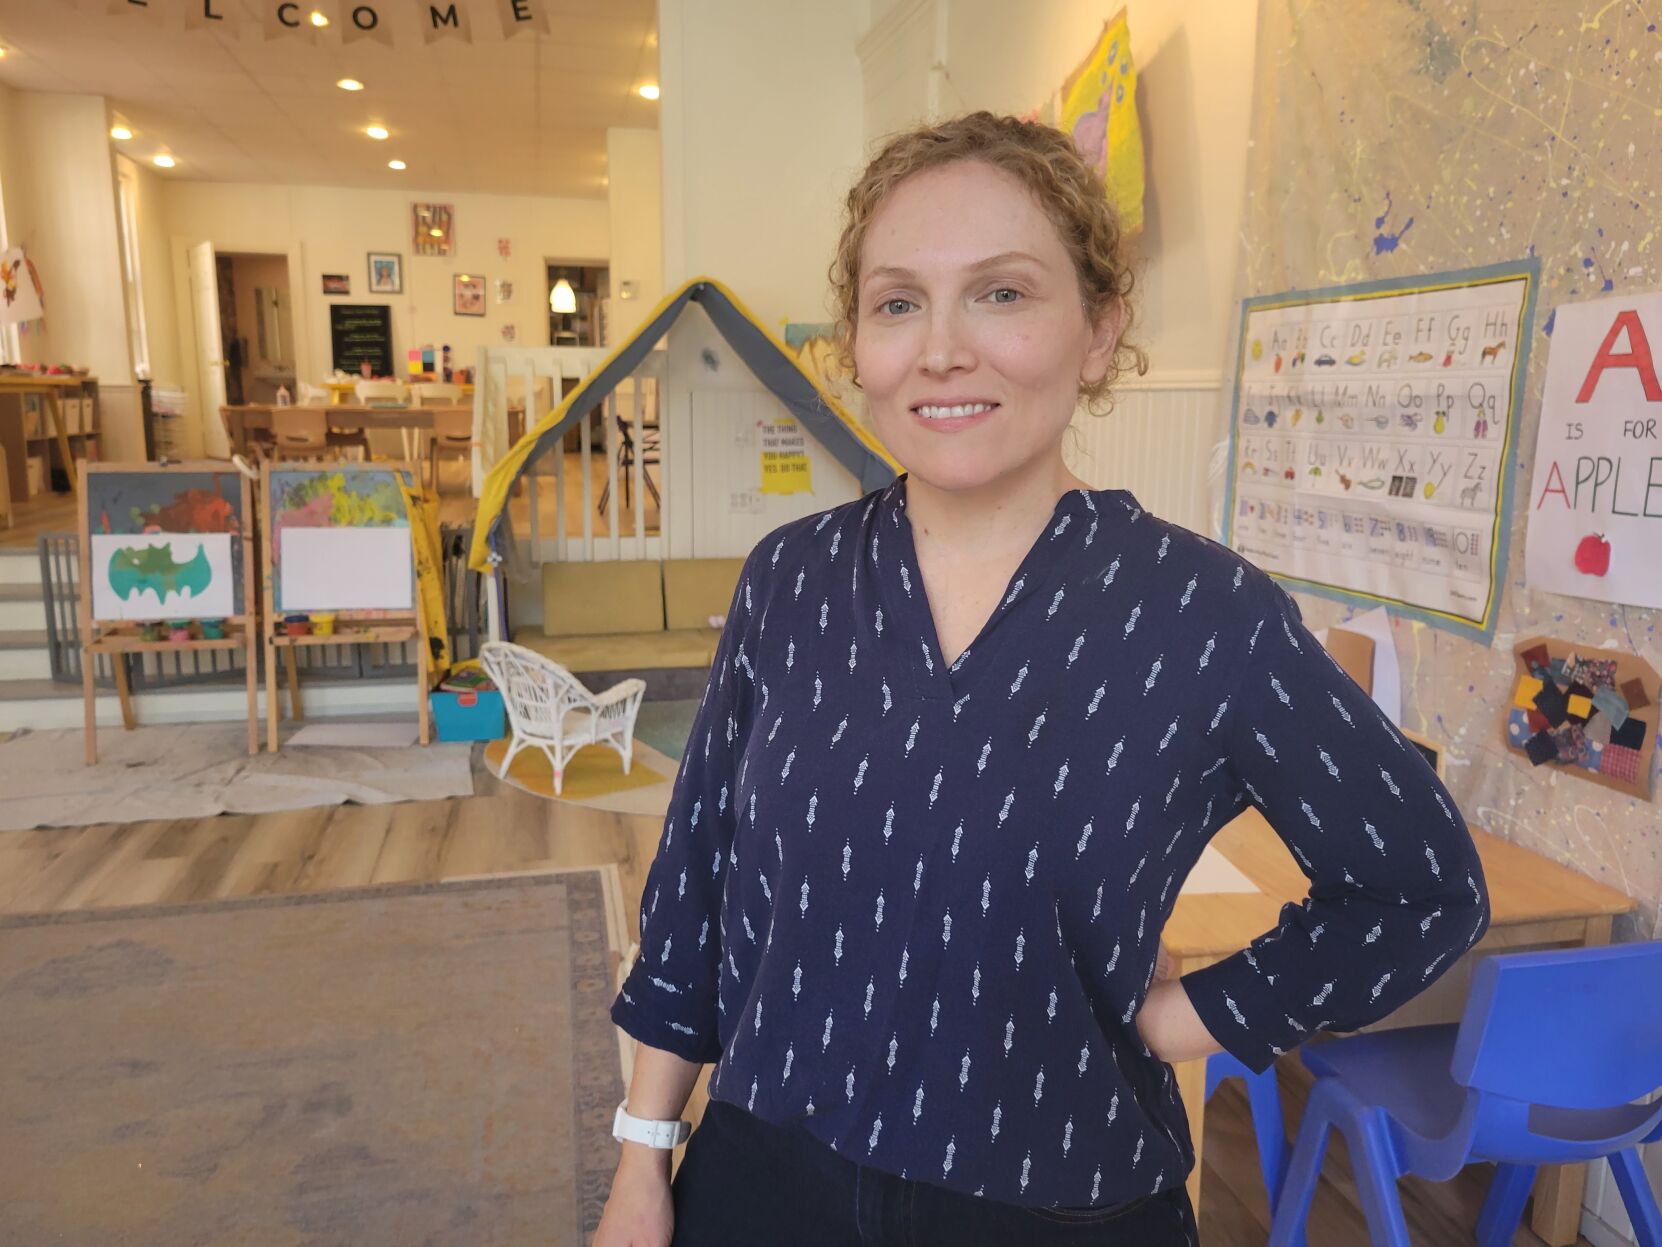 Bluebird Atelier Named a Top Small Business by the U.S. Chamber of